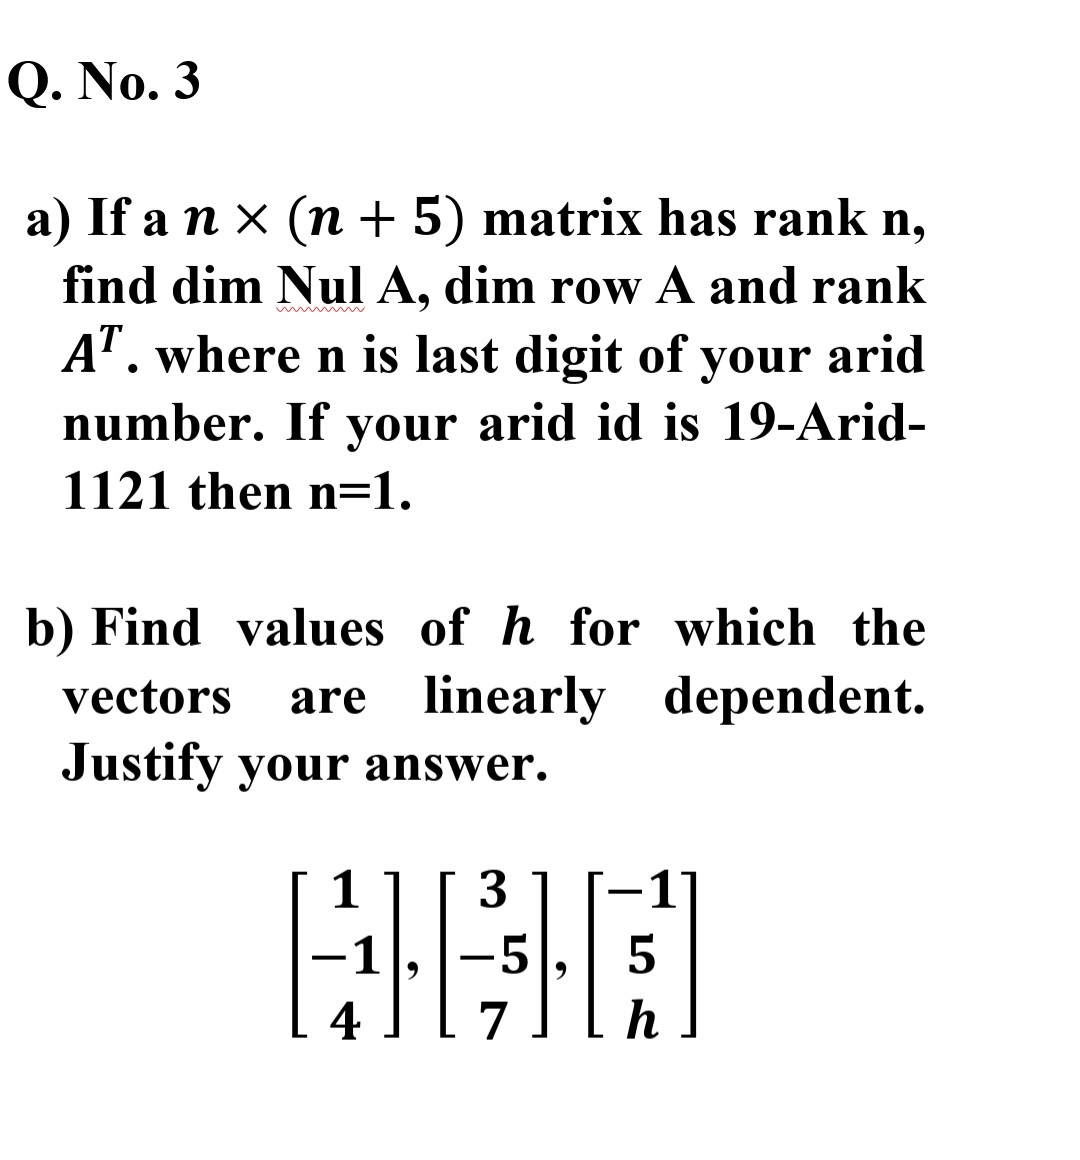 Q. No. 3
a) If a n x (n + 5) matrix has rank n,
find dim Nul A, dim row A and rank
A". where n is last digit of your arid
number. If your arid id is 19-Arid-
1121 then n=1.
b) Find values of h for which the
vectors
are
linearly dependent.
Justify your answer.
3.
-5
5
4
7
h
